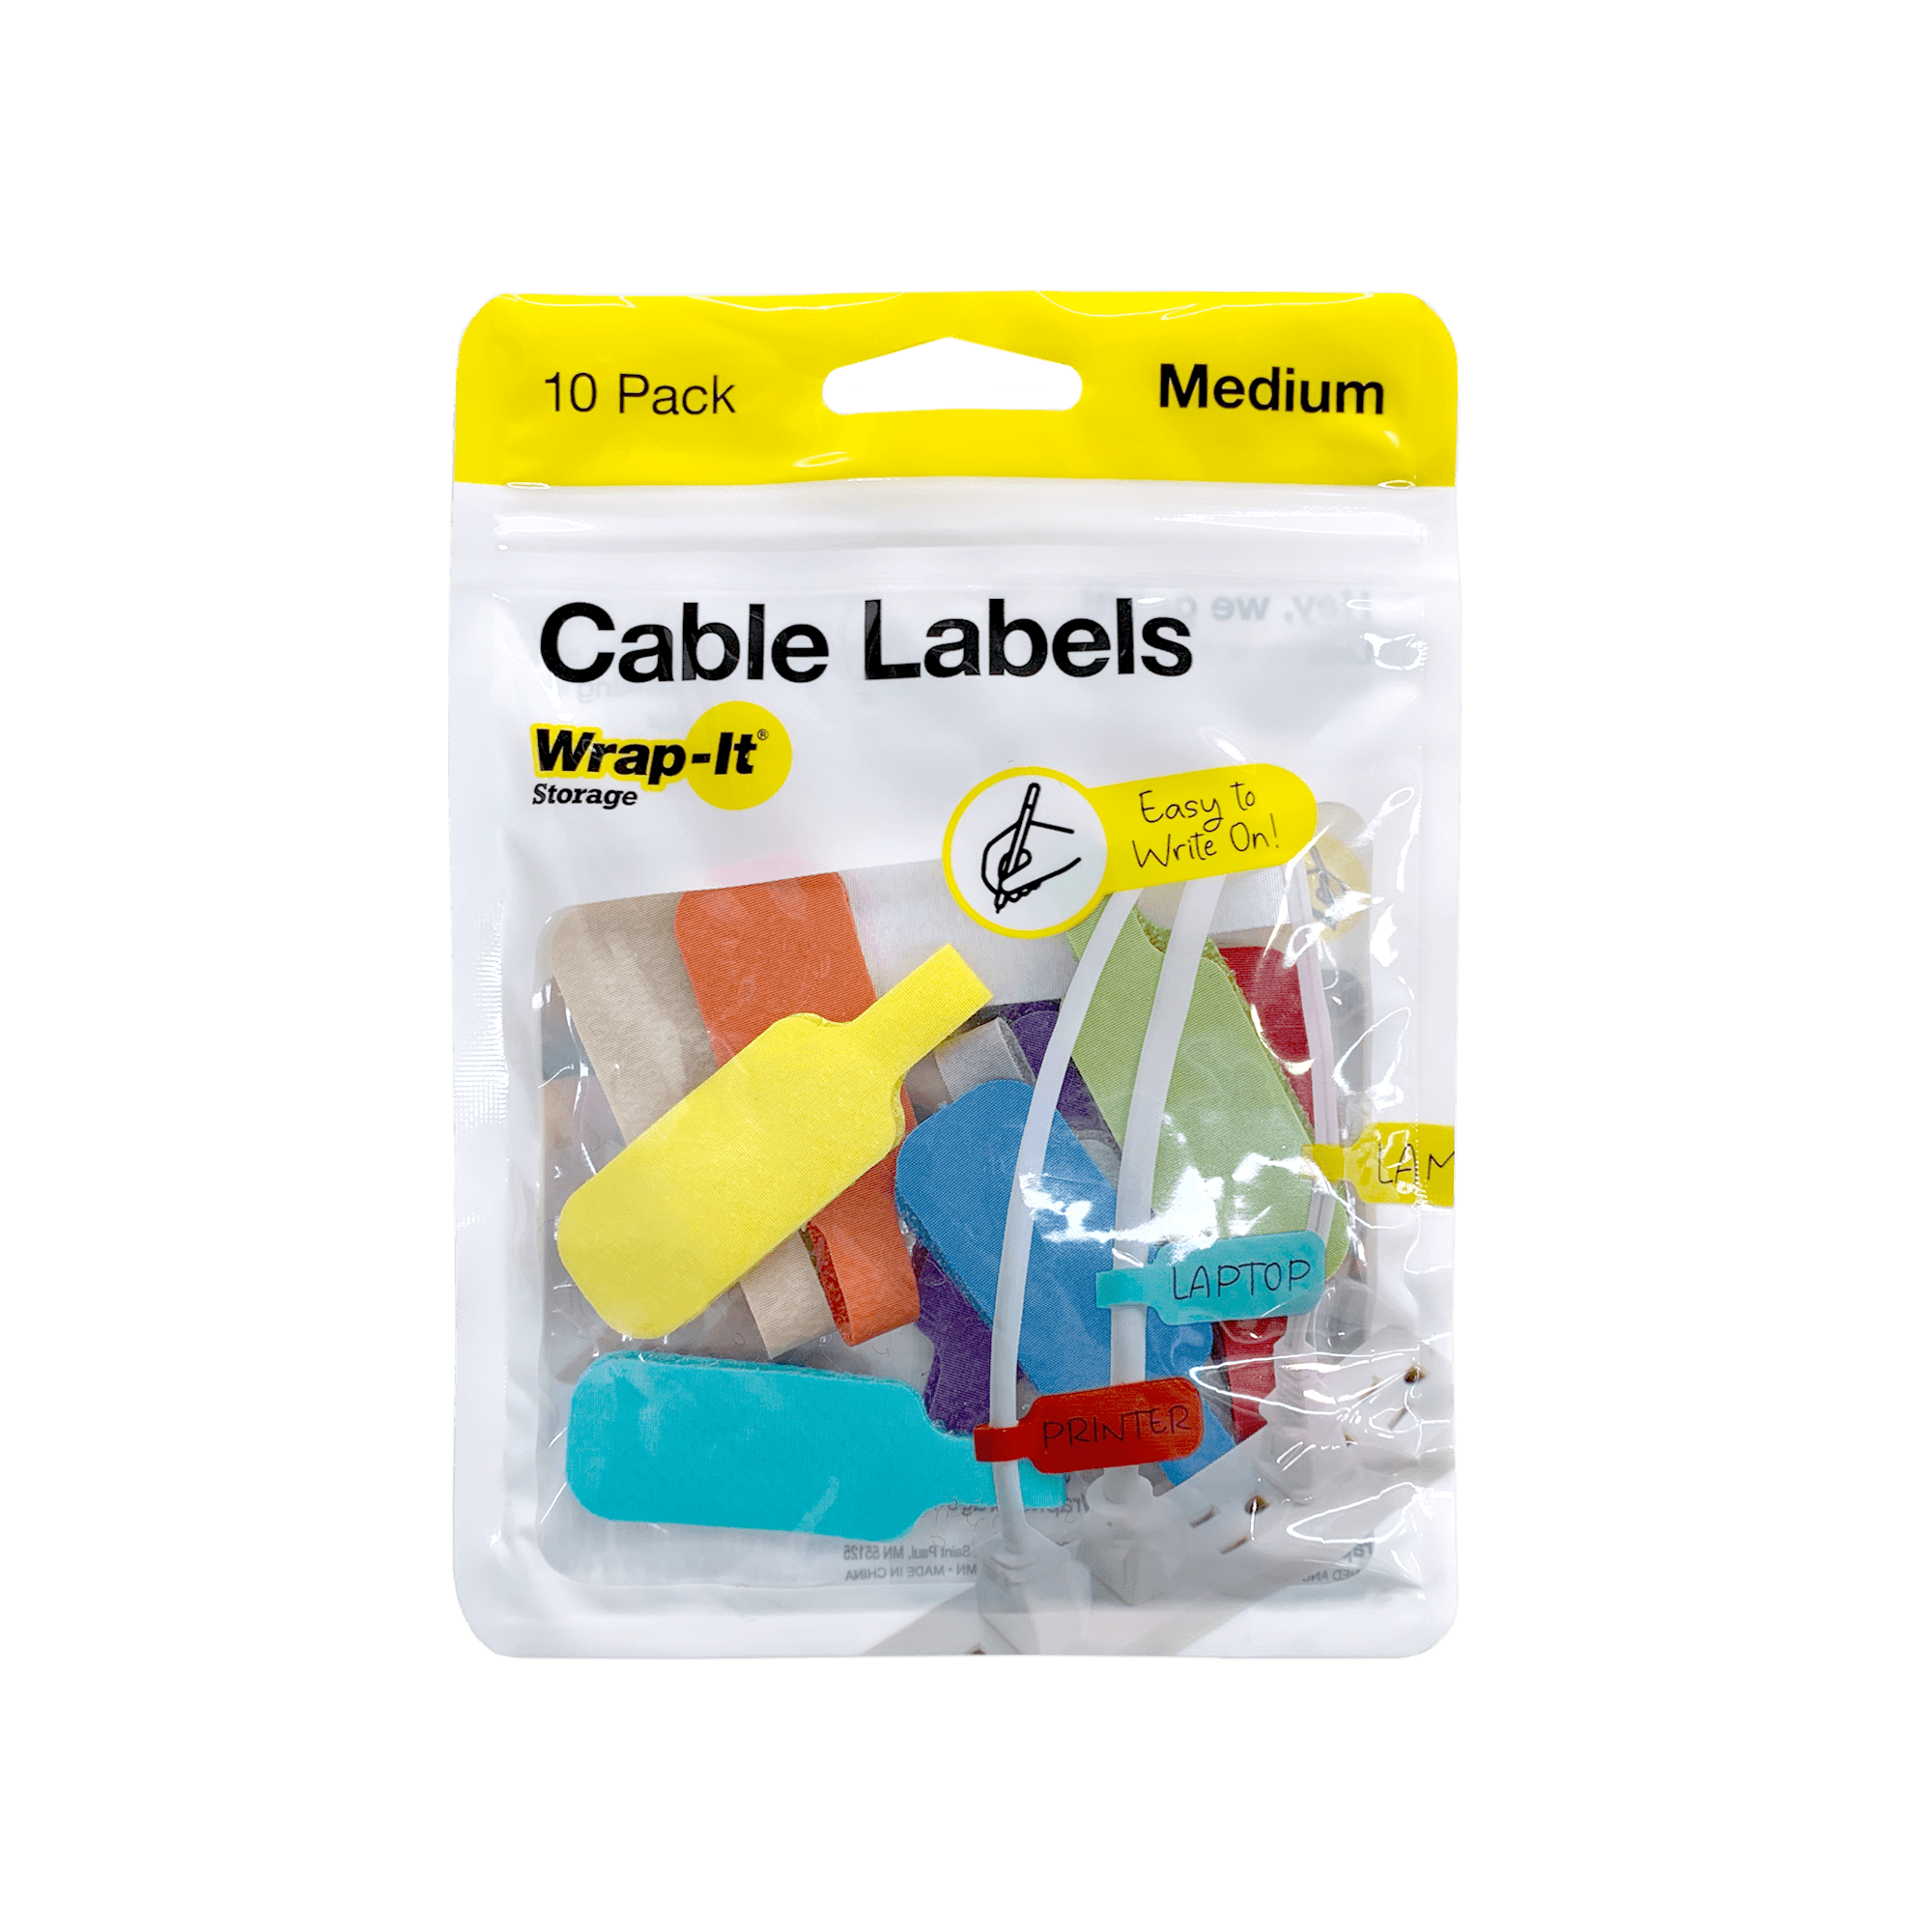 Ladder Inspection Tags Marker Pen + 10 Cable Ties Pack of 10 